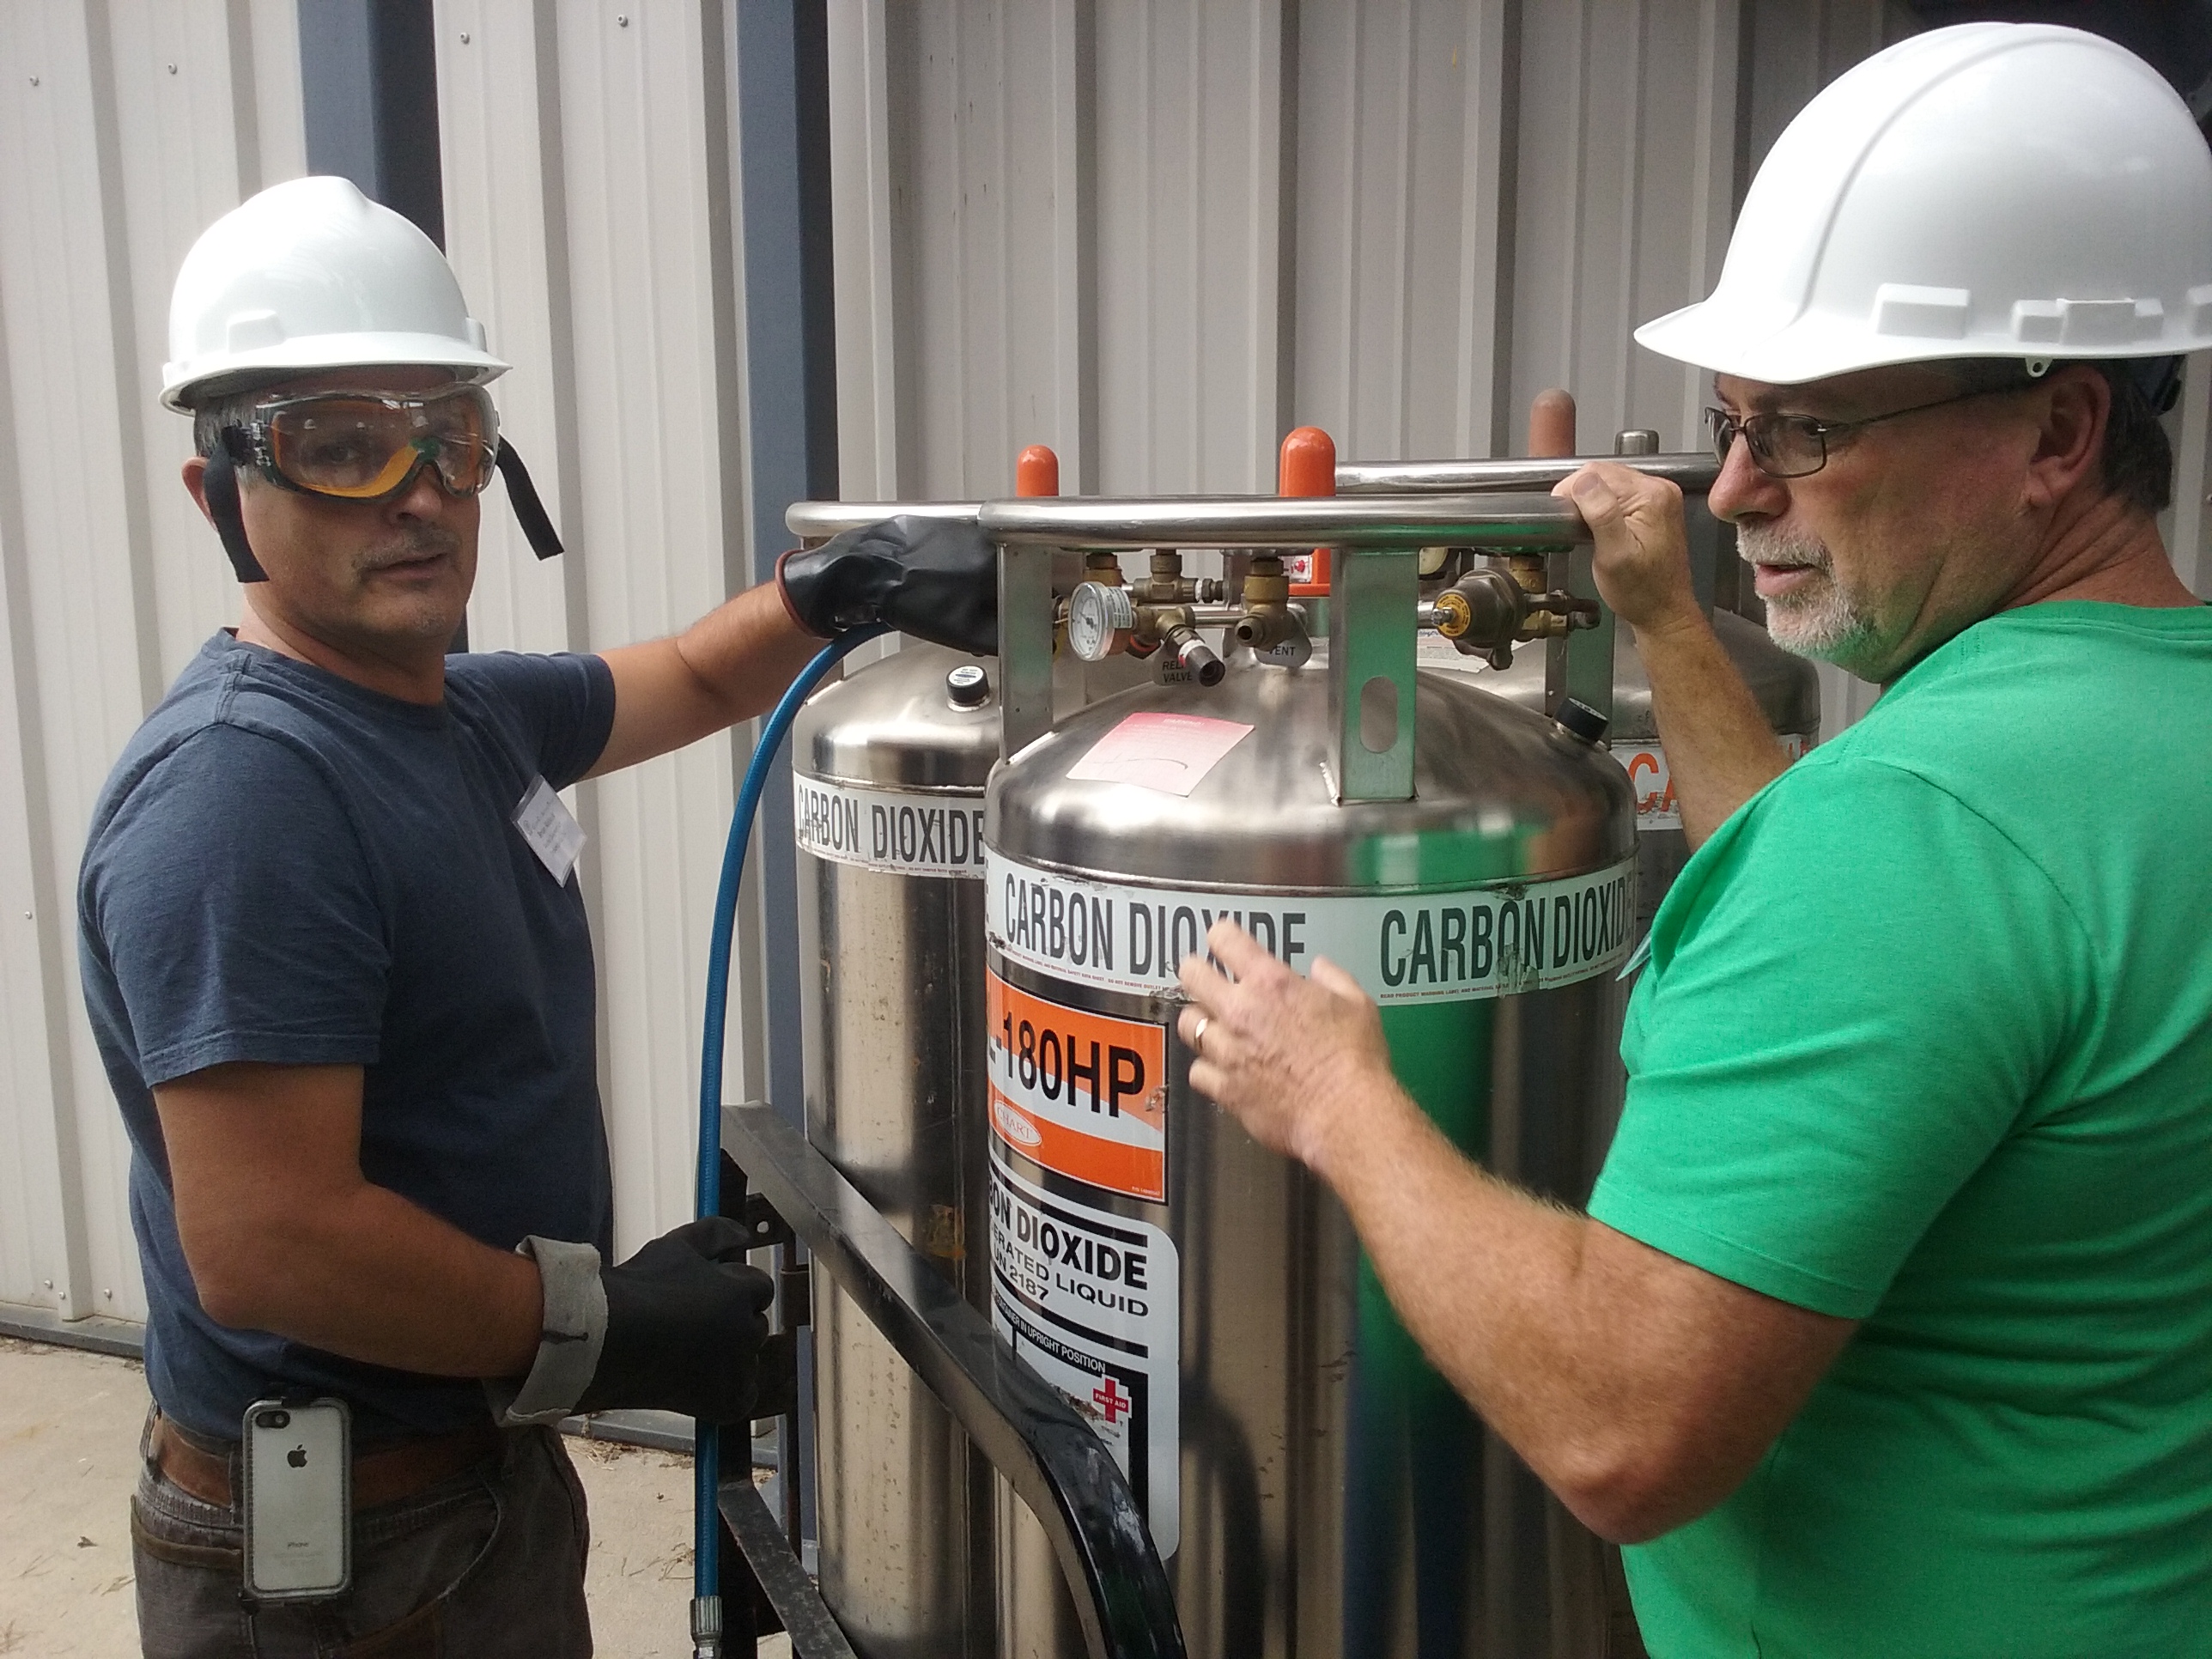 Hands-On CO2 Training